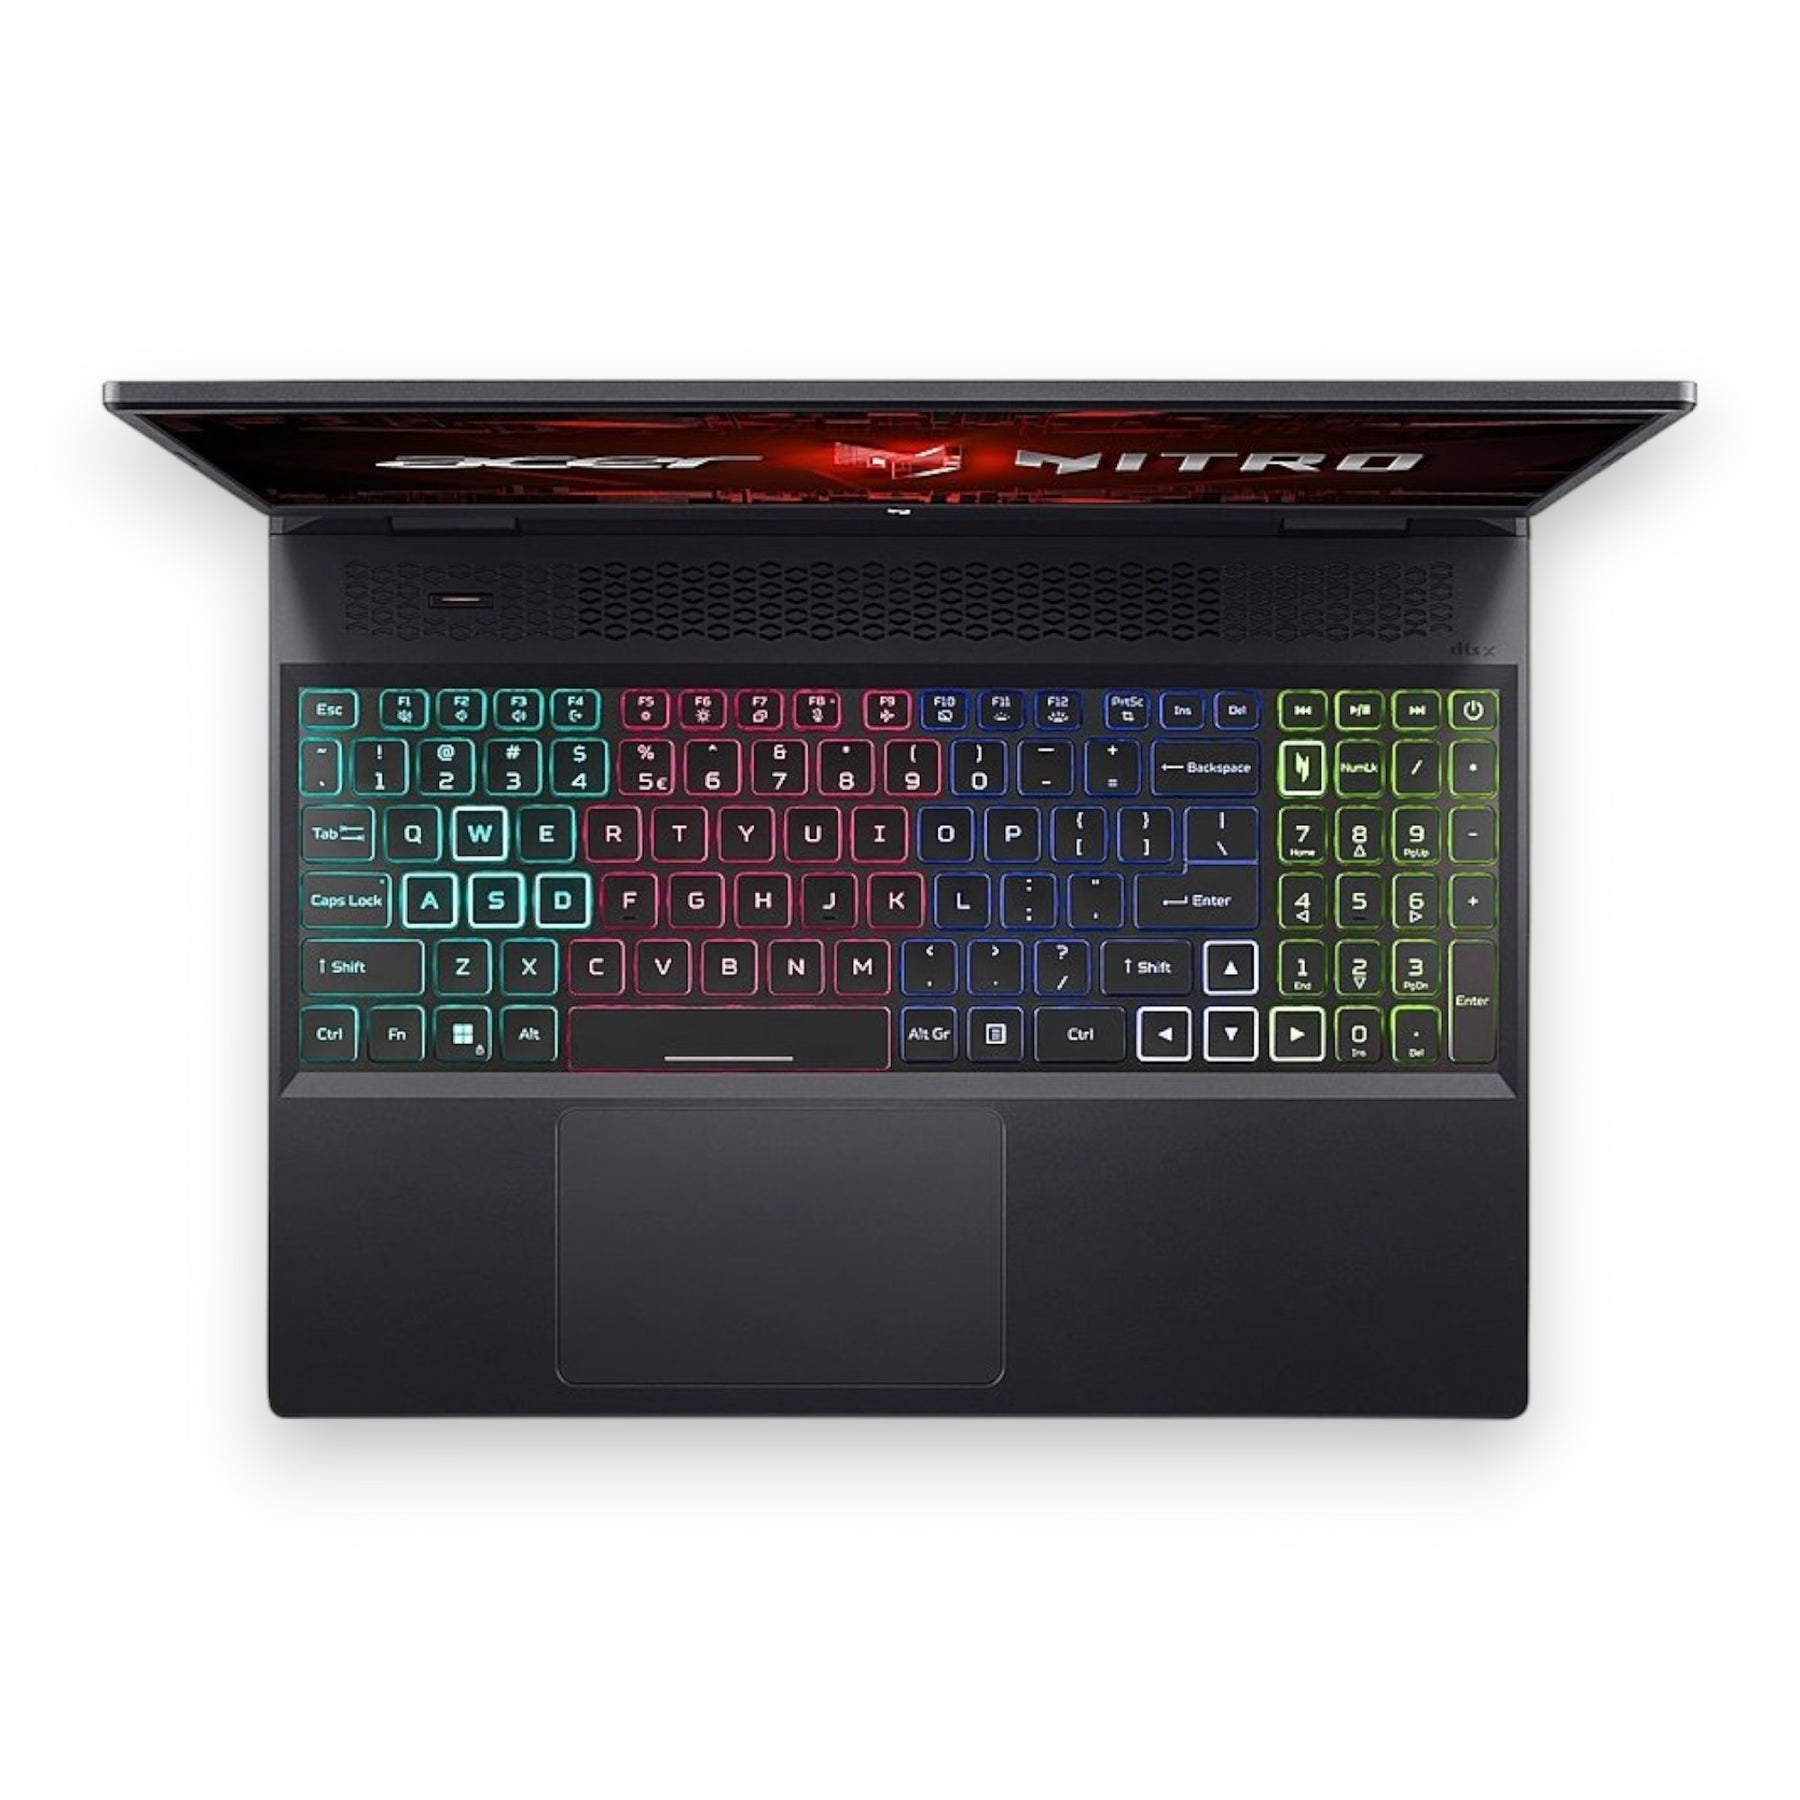 Acer Nitro Gaming Laptop 16" Intel Core i7-13700H 16GB 1TB Hdd GeForce RTX 4050 Win 11 AN16-51-7515